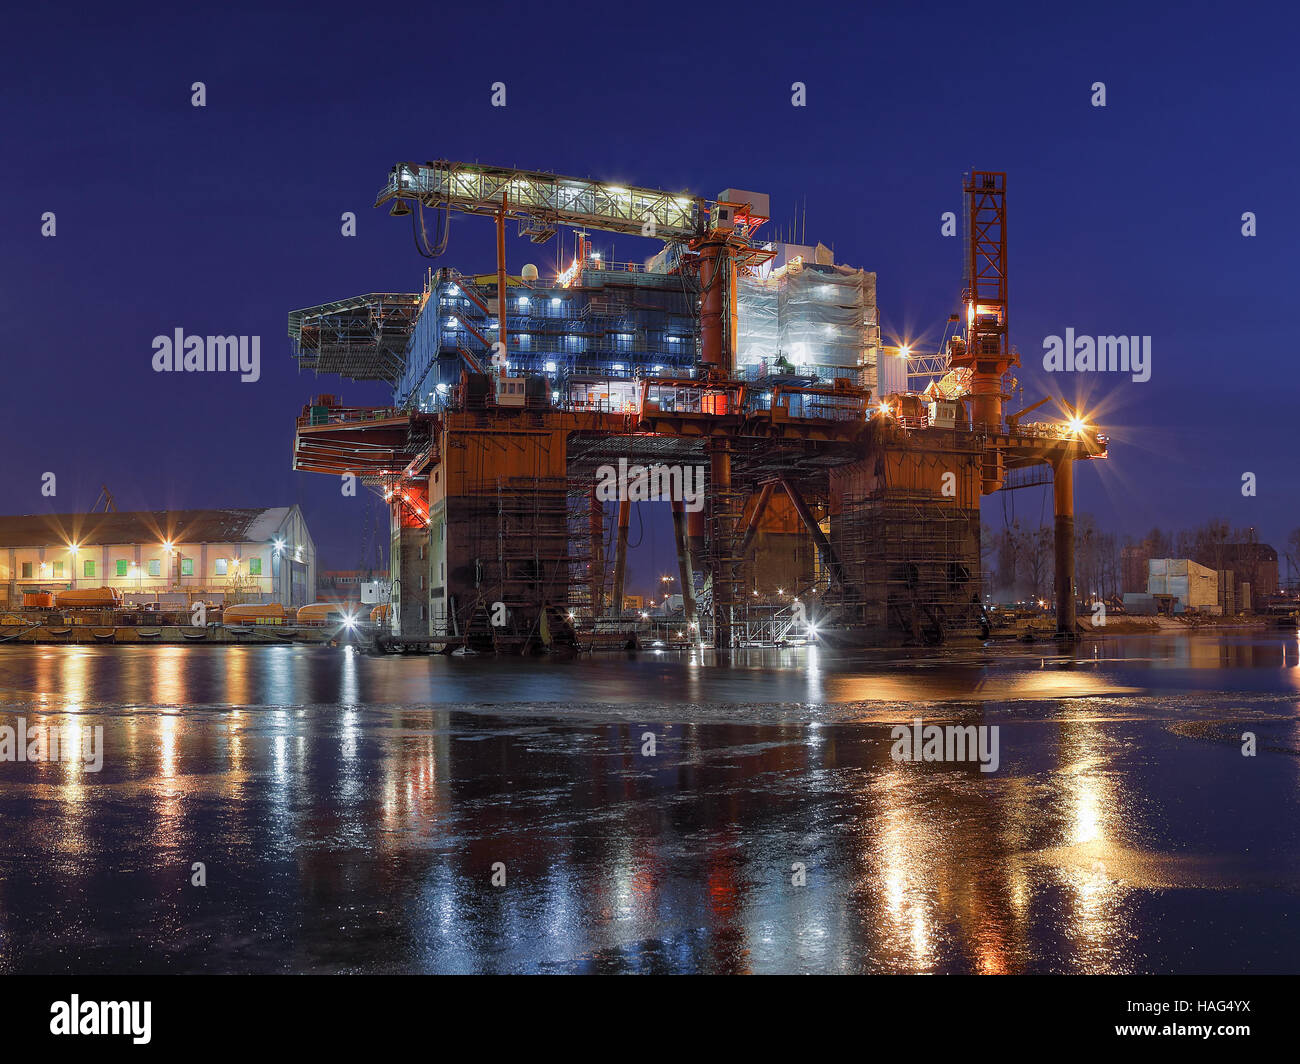 Oil rig under construction at night in Gdansk, Poland. Stock Photo